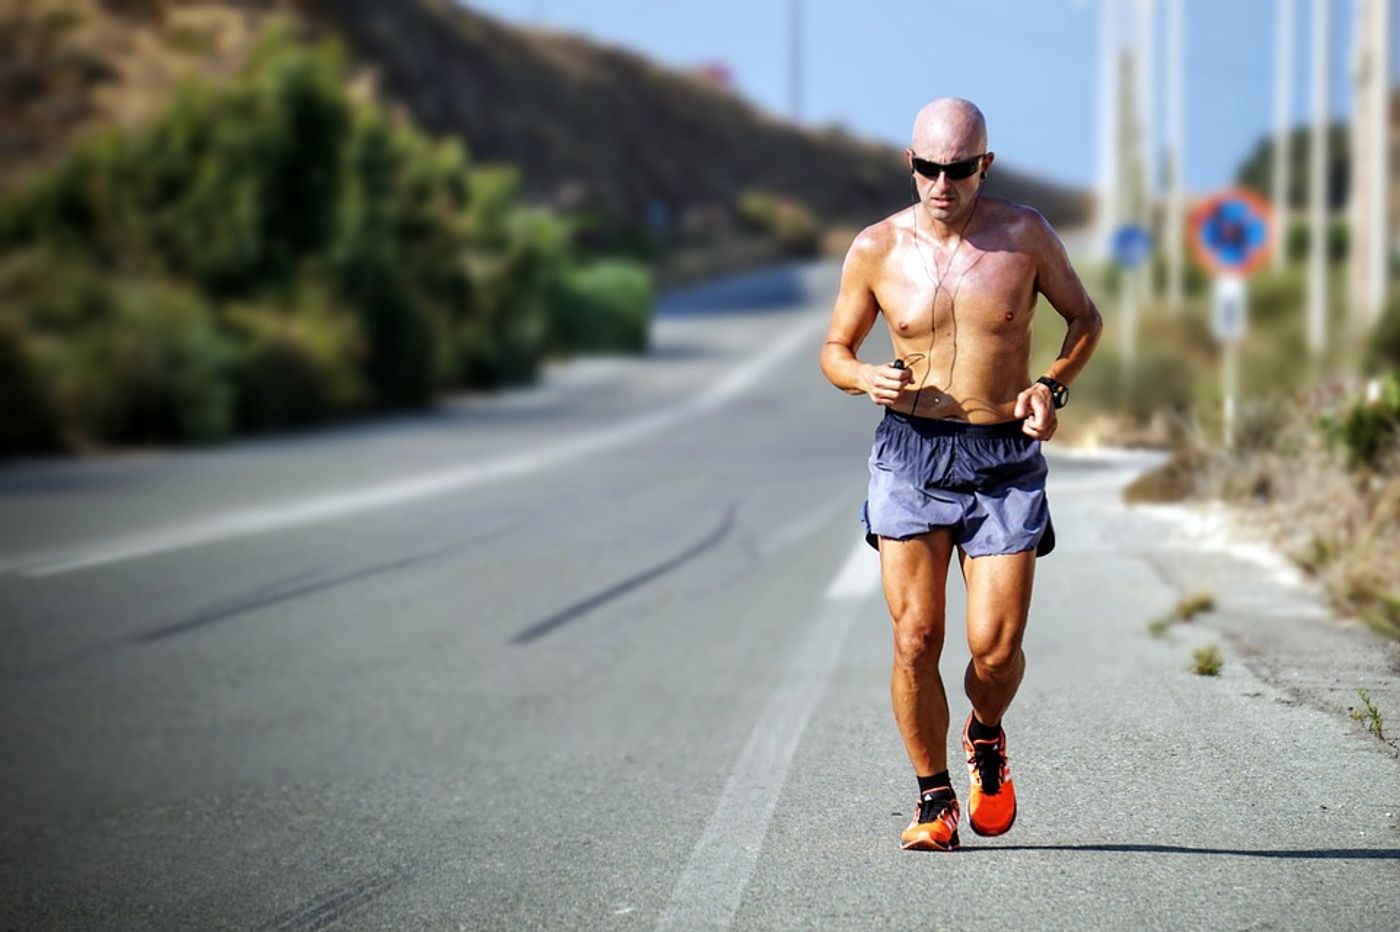 Researchers say physical exercise could protect against increased risk of prostate cancer. Photo: Pixabay